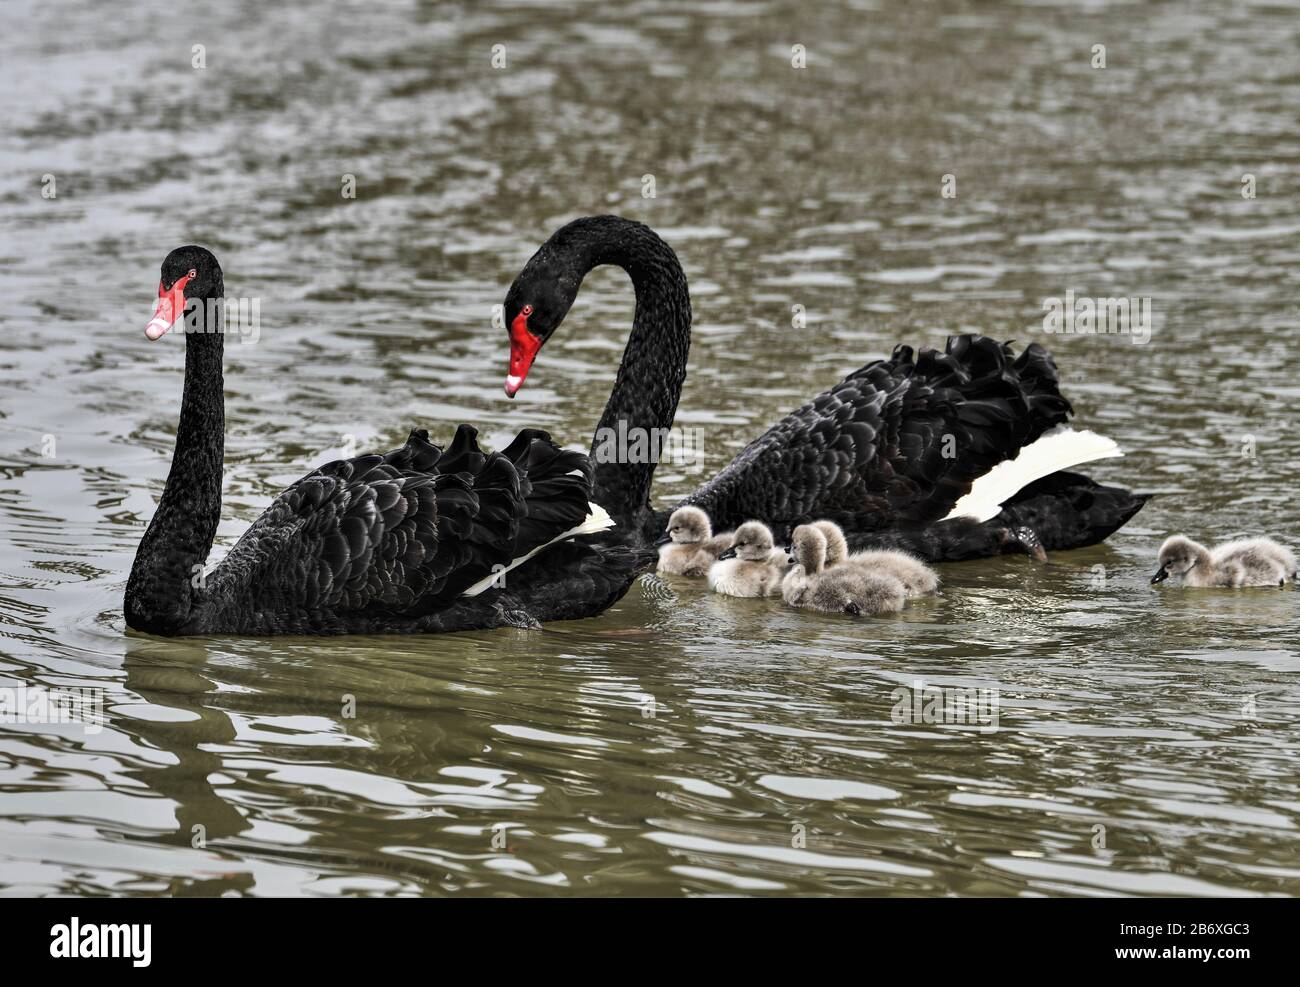 Nogle gange nogle gange Illusion Regnskab March 12, 2020, Shandong, Shandong, China: ShandongÃ¯Â¼Å'CHINA-A black swan  couple and five newborn black swans play in the canal wetland park in  Taierzhuang district, Zaozhuang city, Shandong province, China. (Credit  Image: ©